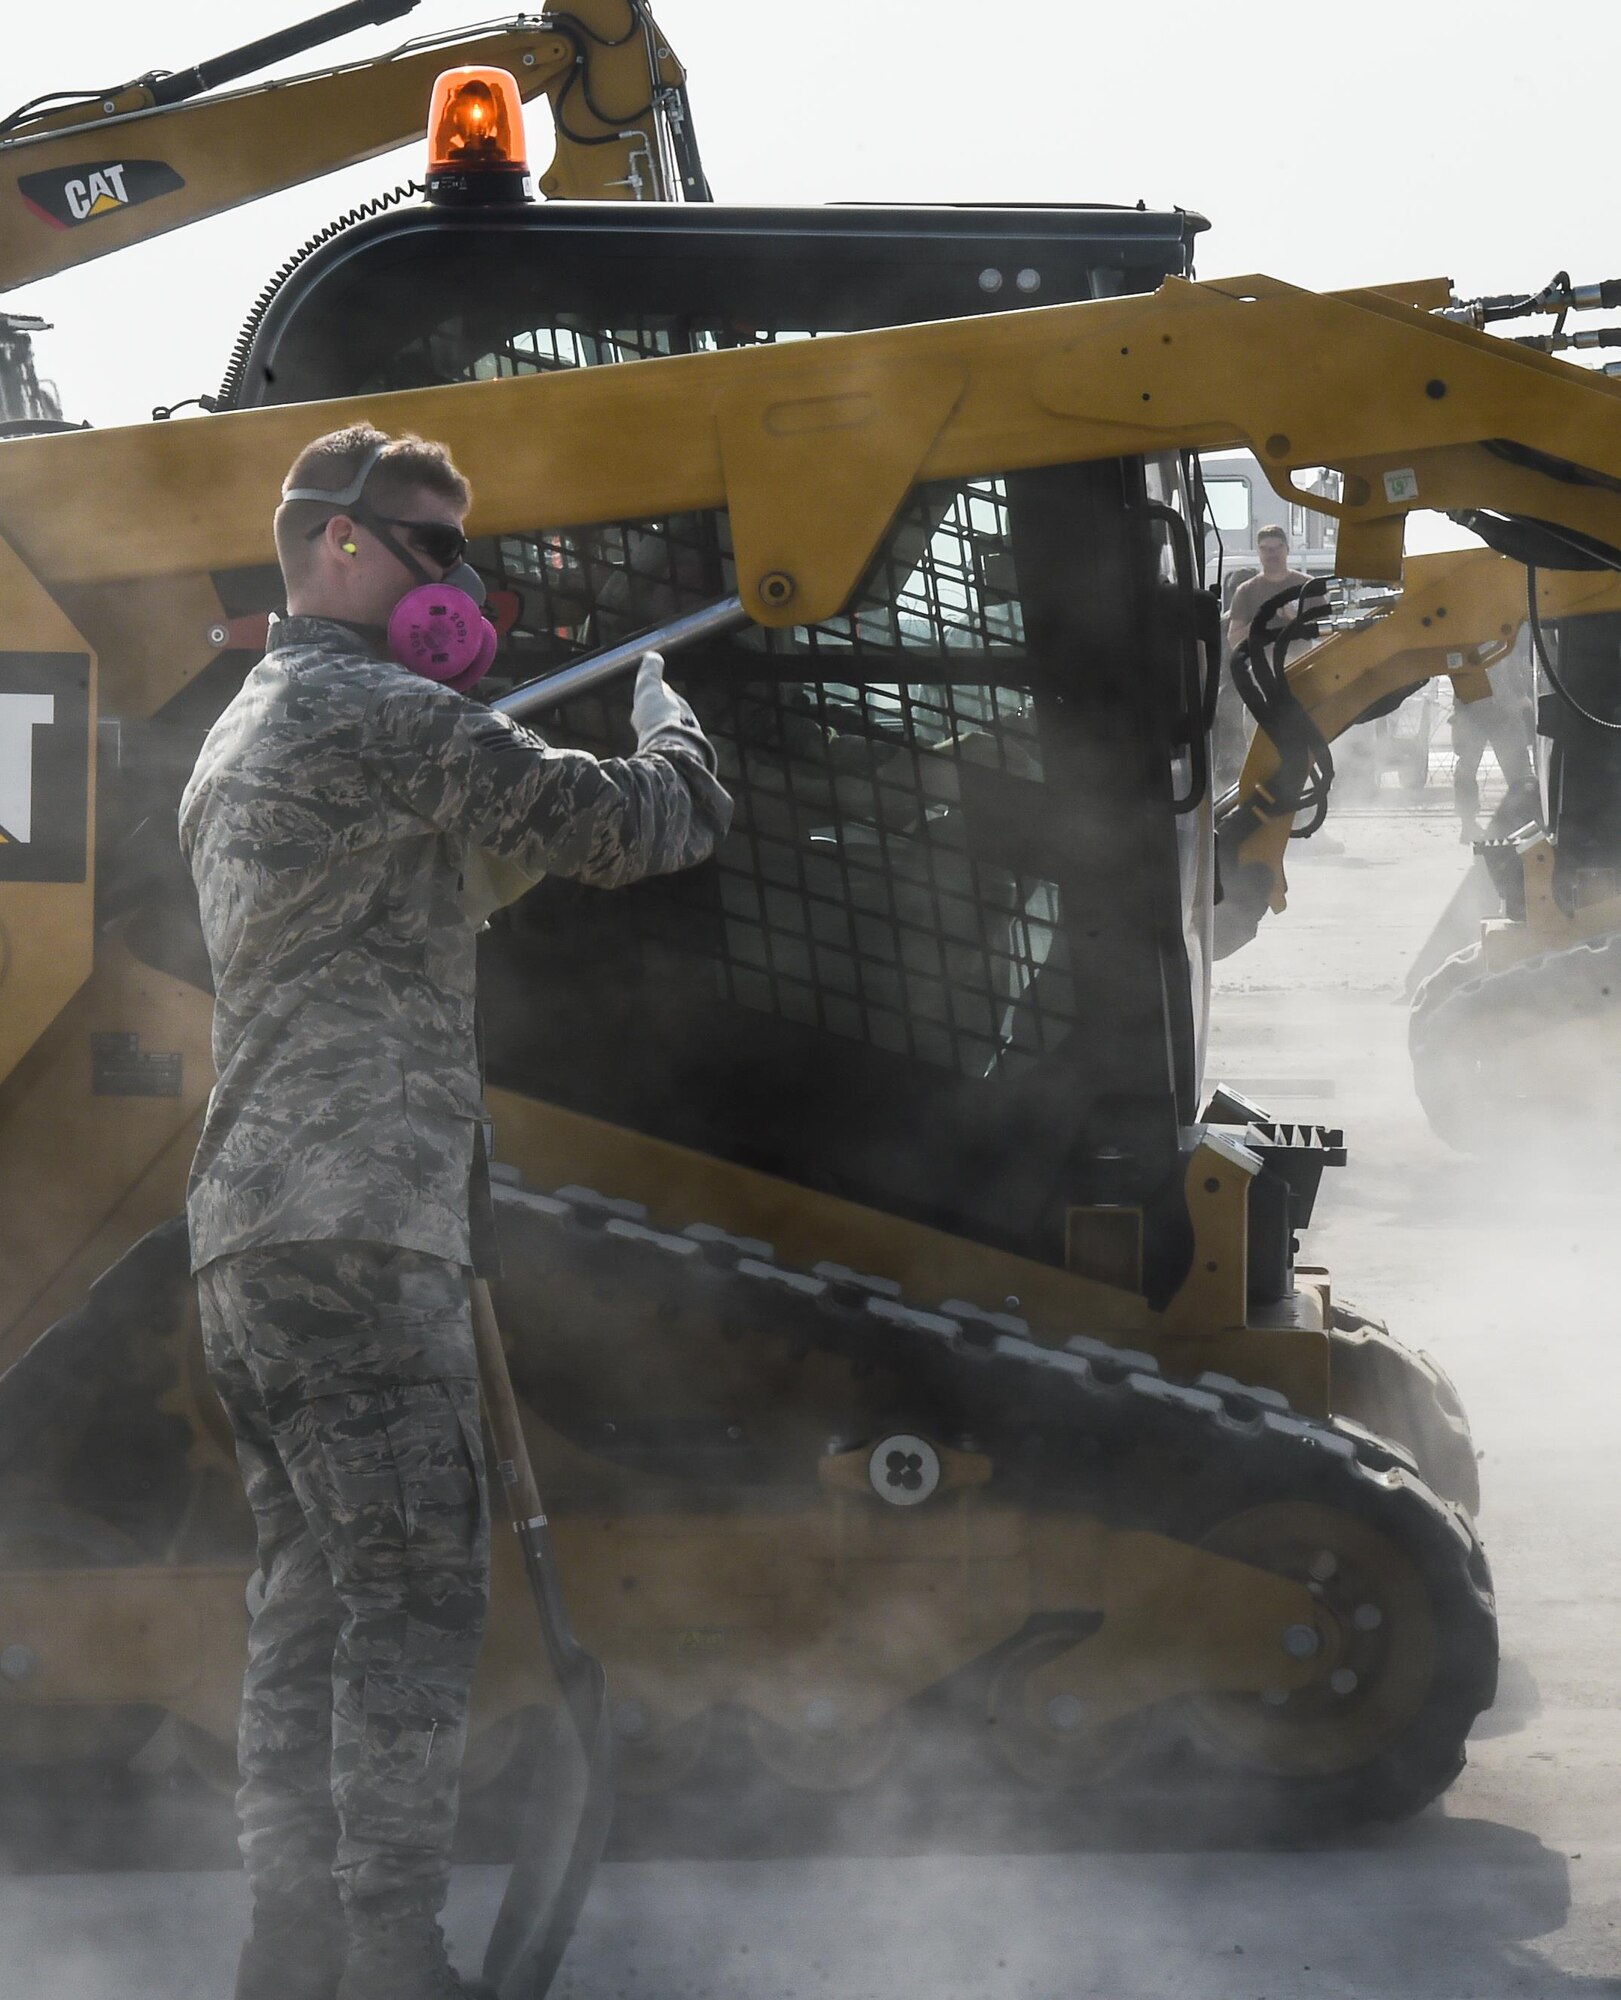 U.S. Air Force Senior Airman Tyler Rutledge, 773d Civil Engineer Squadron, directs a fellow Airman during a Rapid Airfield Damage Repair bilateral training exercise at Gwangju Air Base, Republic of Korea, Nov. 8, 2017. Approximately forty U.S. Airmen from the 773d CES at Joint Base Elmendorf-Richardson, Alaska, and 40 R.O.K. Airmen trained together for a week to learn a new runway repair process for wartime contingencies. The bilateral training exercise enhanced interoperability and built partnership capacity in the Indo-Asia Pacific region. (U.S. Air Force photo by Senior Airman Curt Beach)